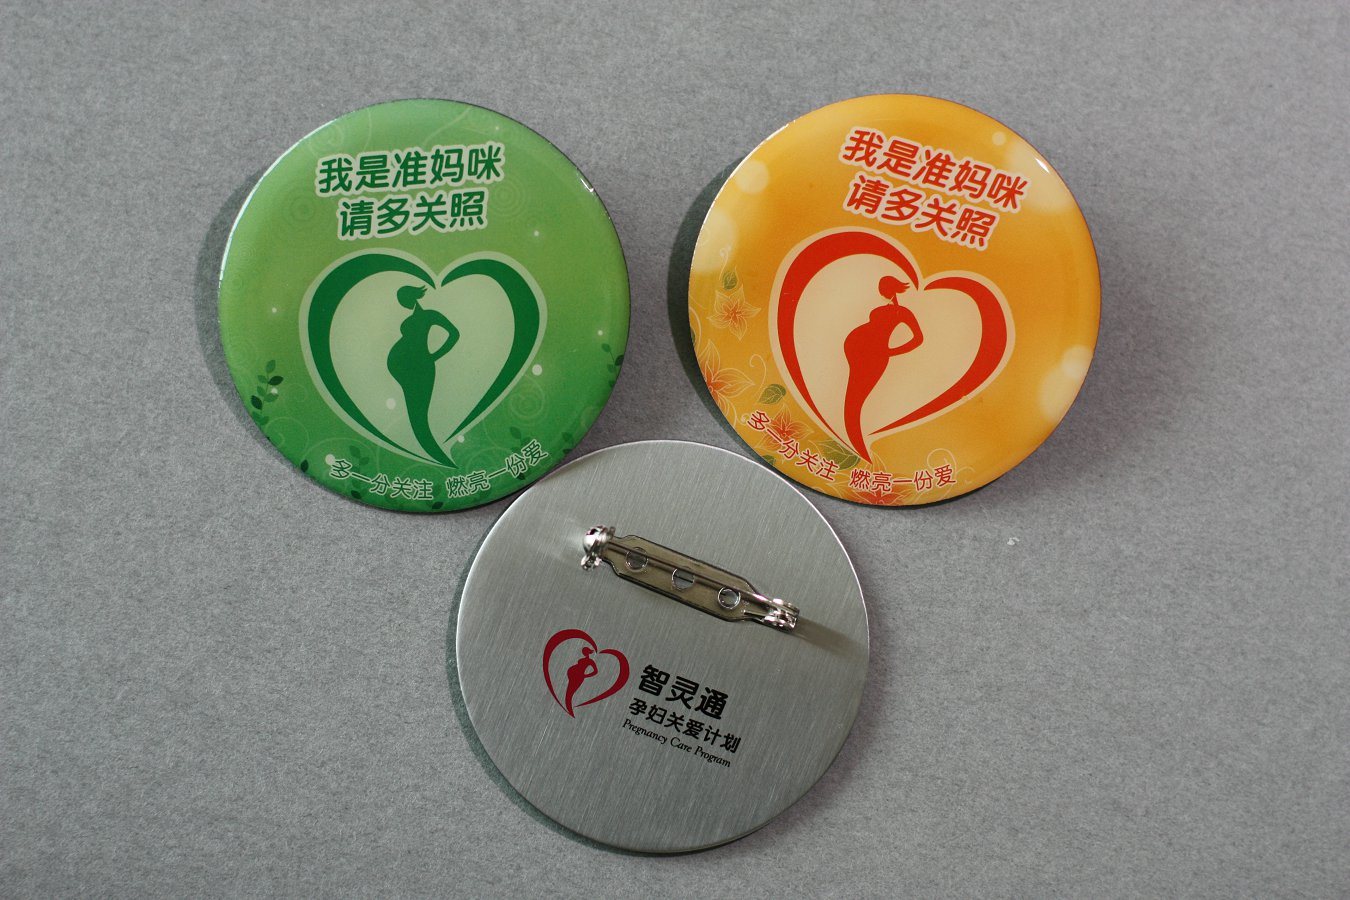 Offset Printed Badge (GZHY-YS-048)